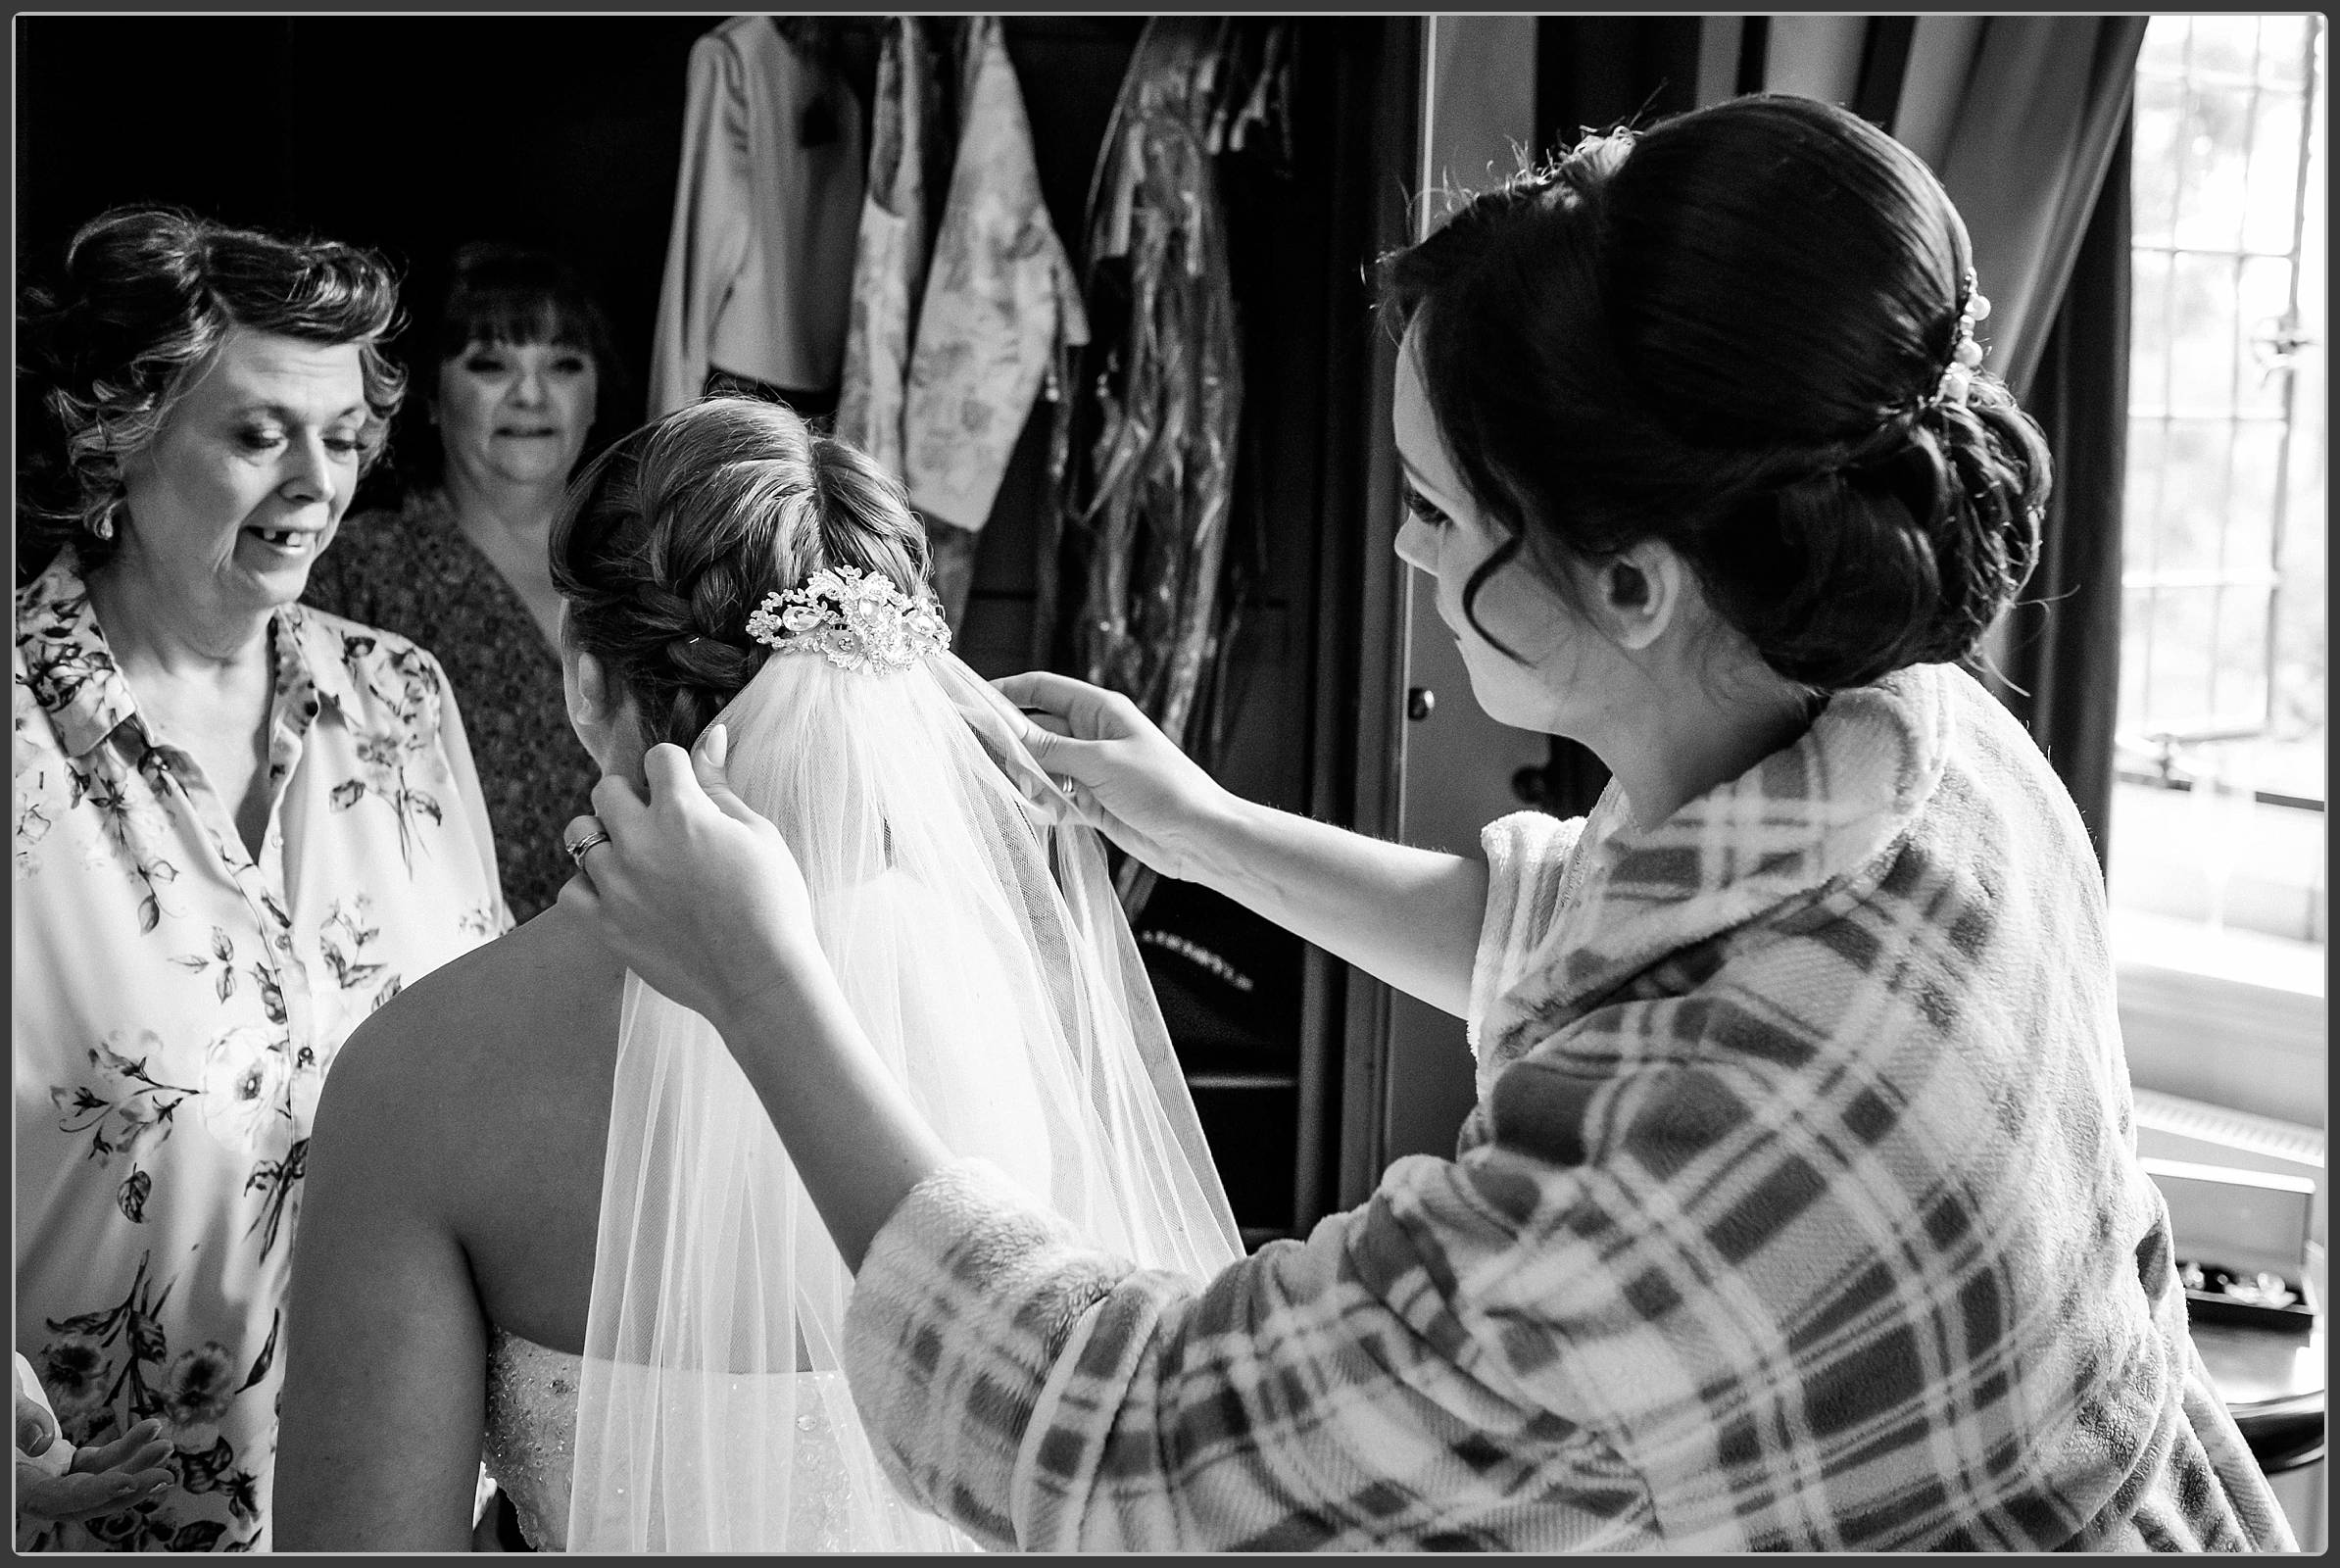 The bride having her veil attached